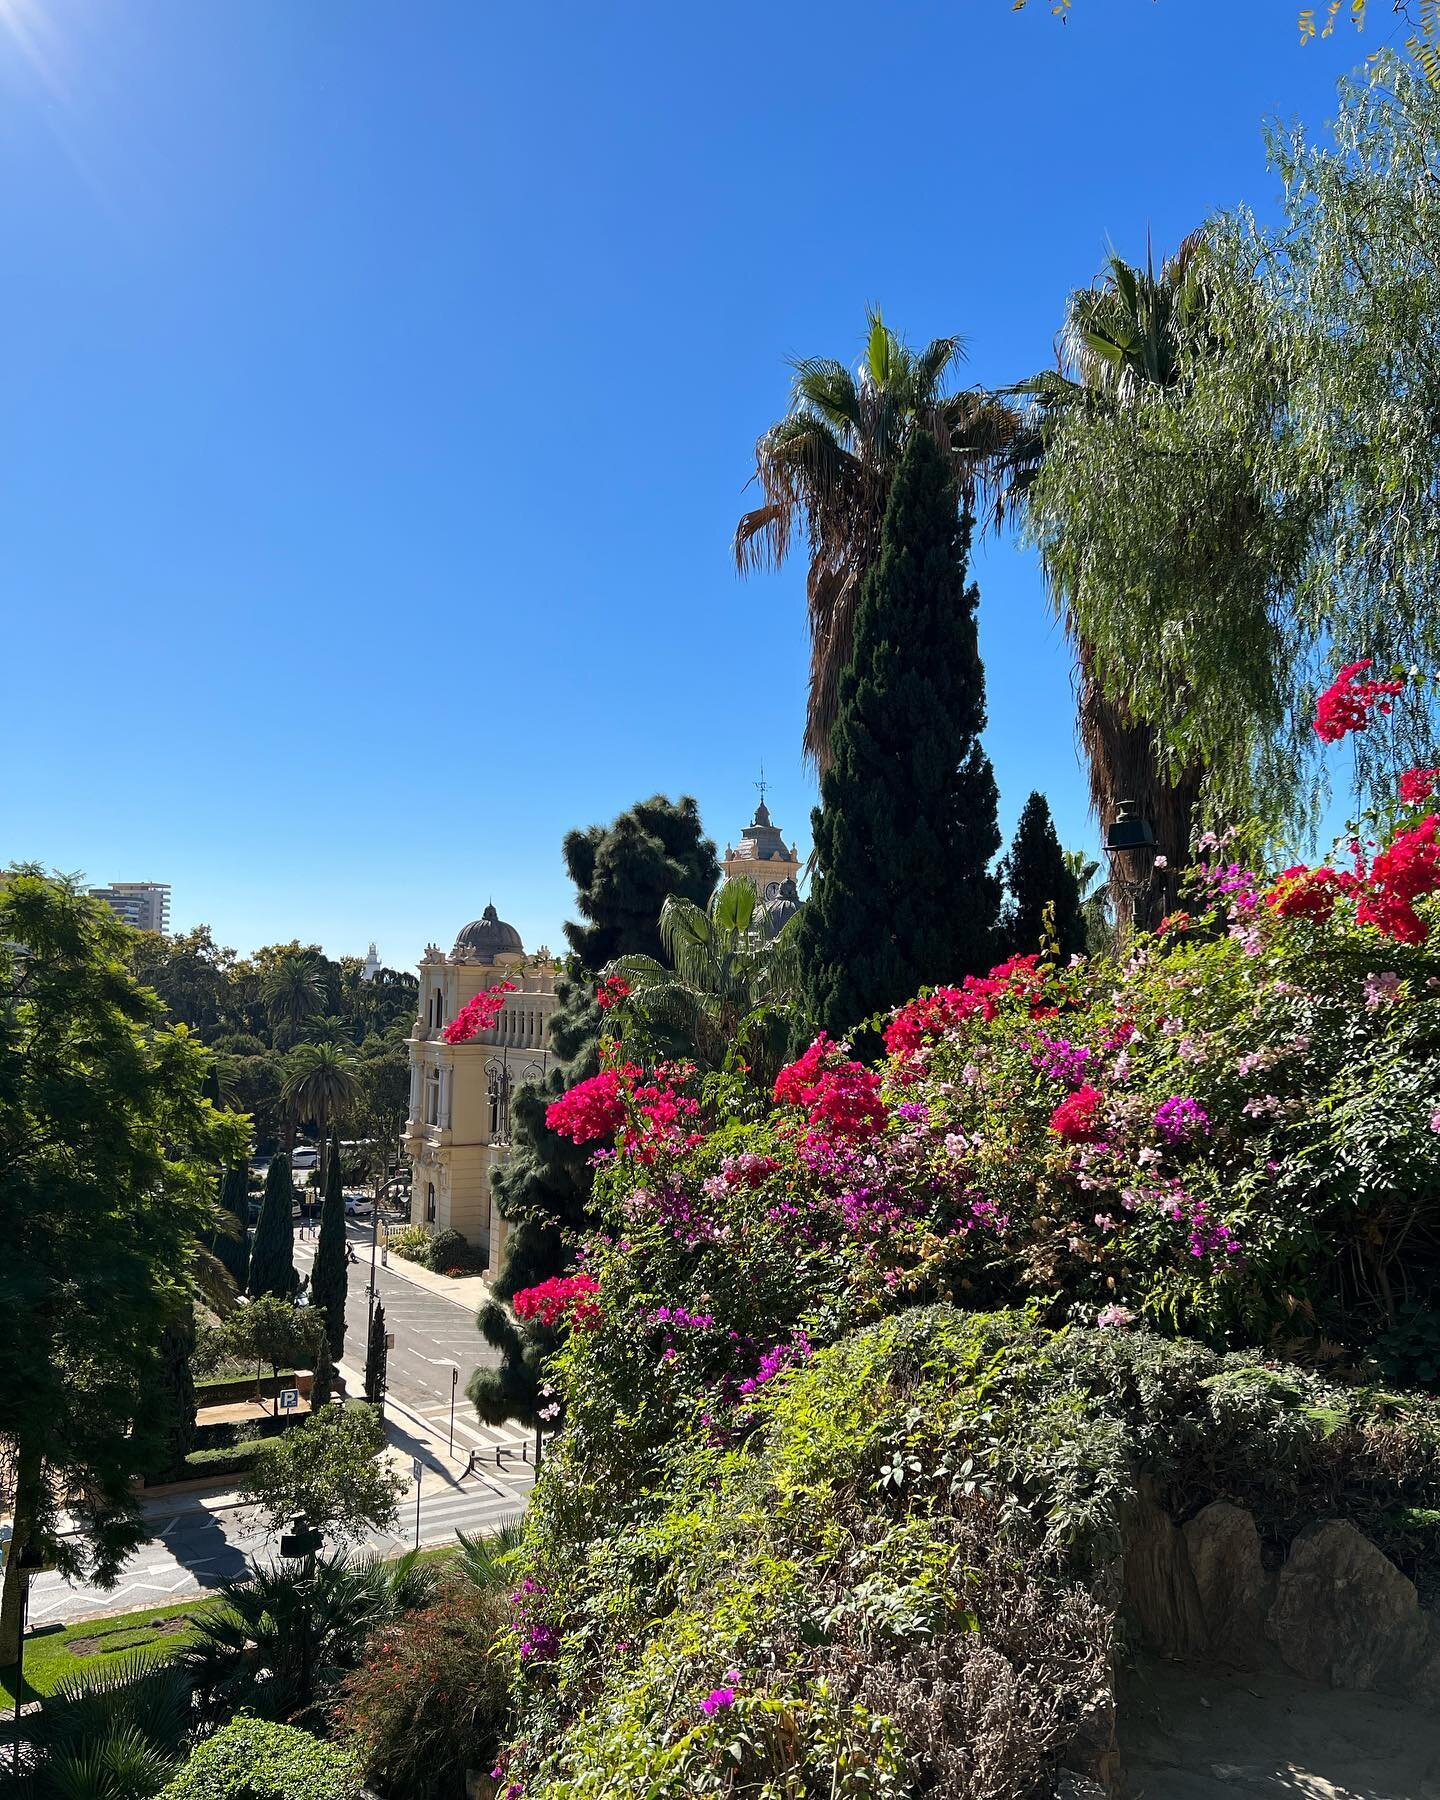 I have really enjoyed touring the gardens of Andalusia; from the beautiful courtyards of grand villas, to the public gardens that line the grand vias 🌴🌺🌳🌹
@nina_seed_interiors 
#ilovetravel 
.
.
.
.
.
#gardens #andalucia #andalusia #spanishgarden